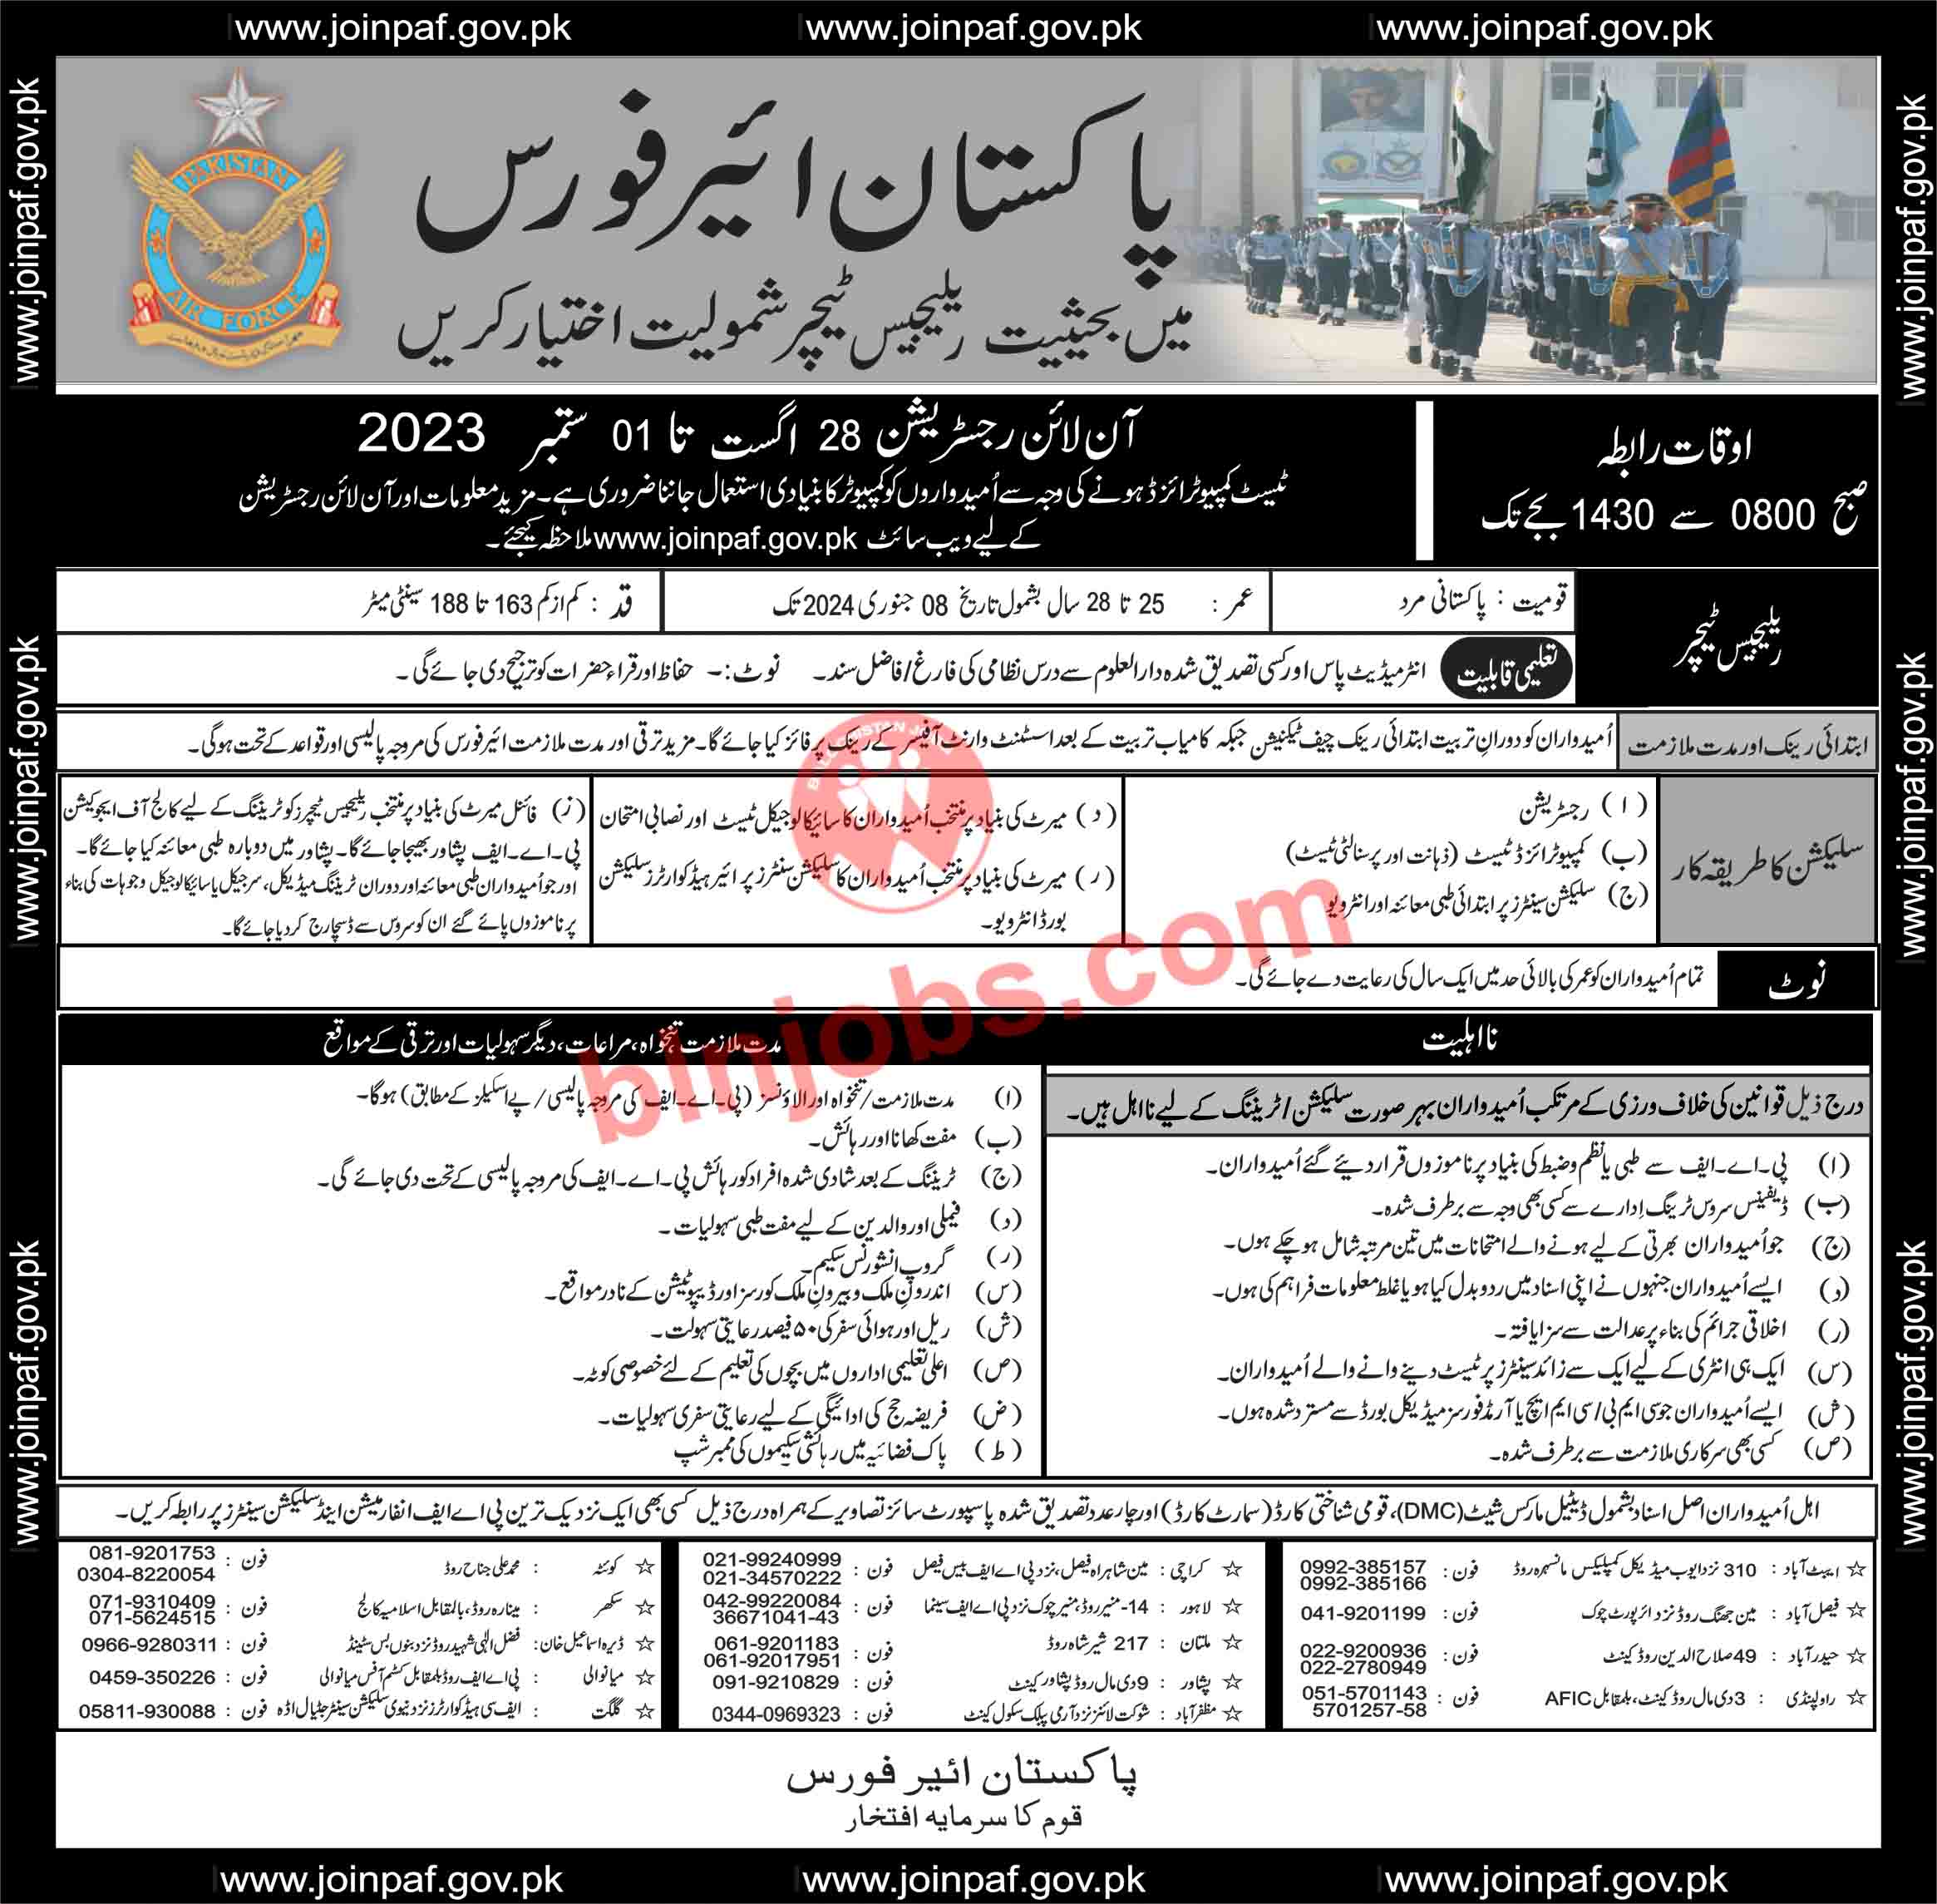 Join Pakistan Airforce PAF Jobs 2023